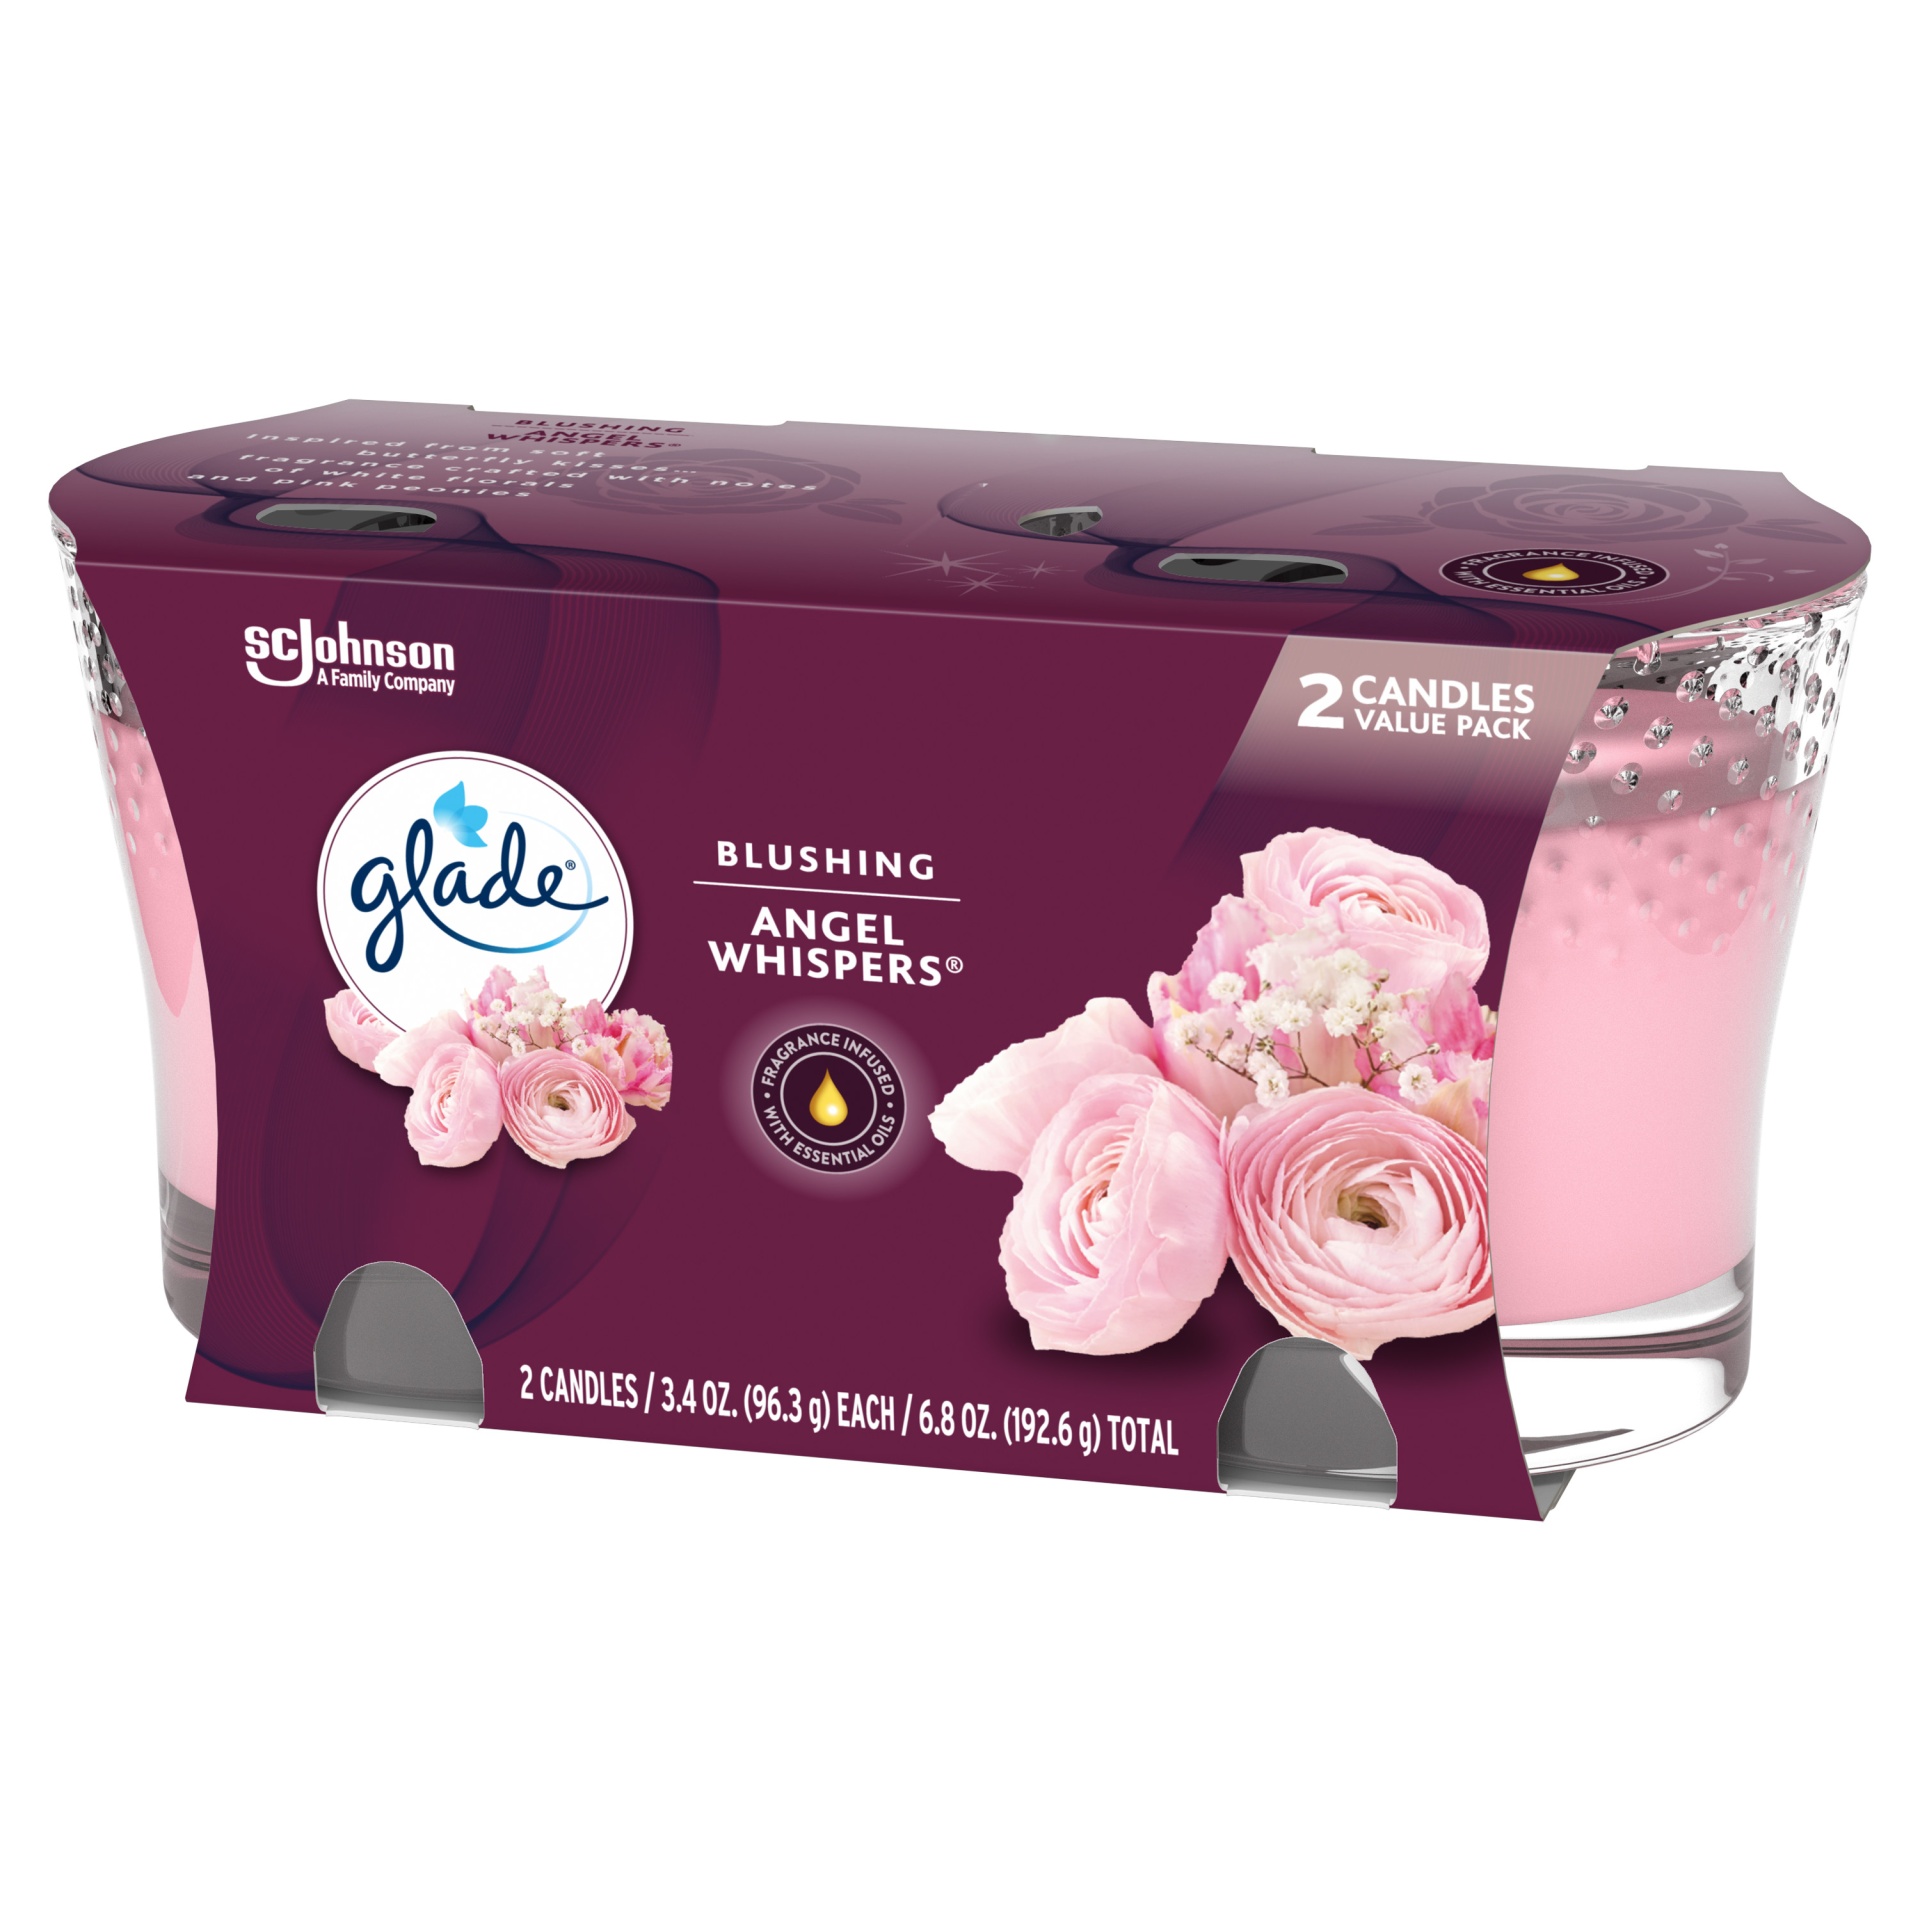 slide 3 of 6, Glade Candle Angel Whispers Scent, 1-Wick, 3.4 oz (96.3 g) Each, 2 Counts, Fragrance Infused with Essential Oils, Notes of Bulgarian Rose, Peach, White Floral Bouquet, Lead-Free Wick Scented Candles, 2 ct; 3.4 oz